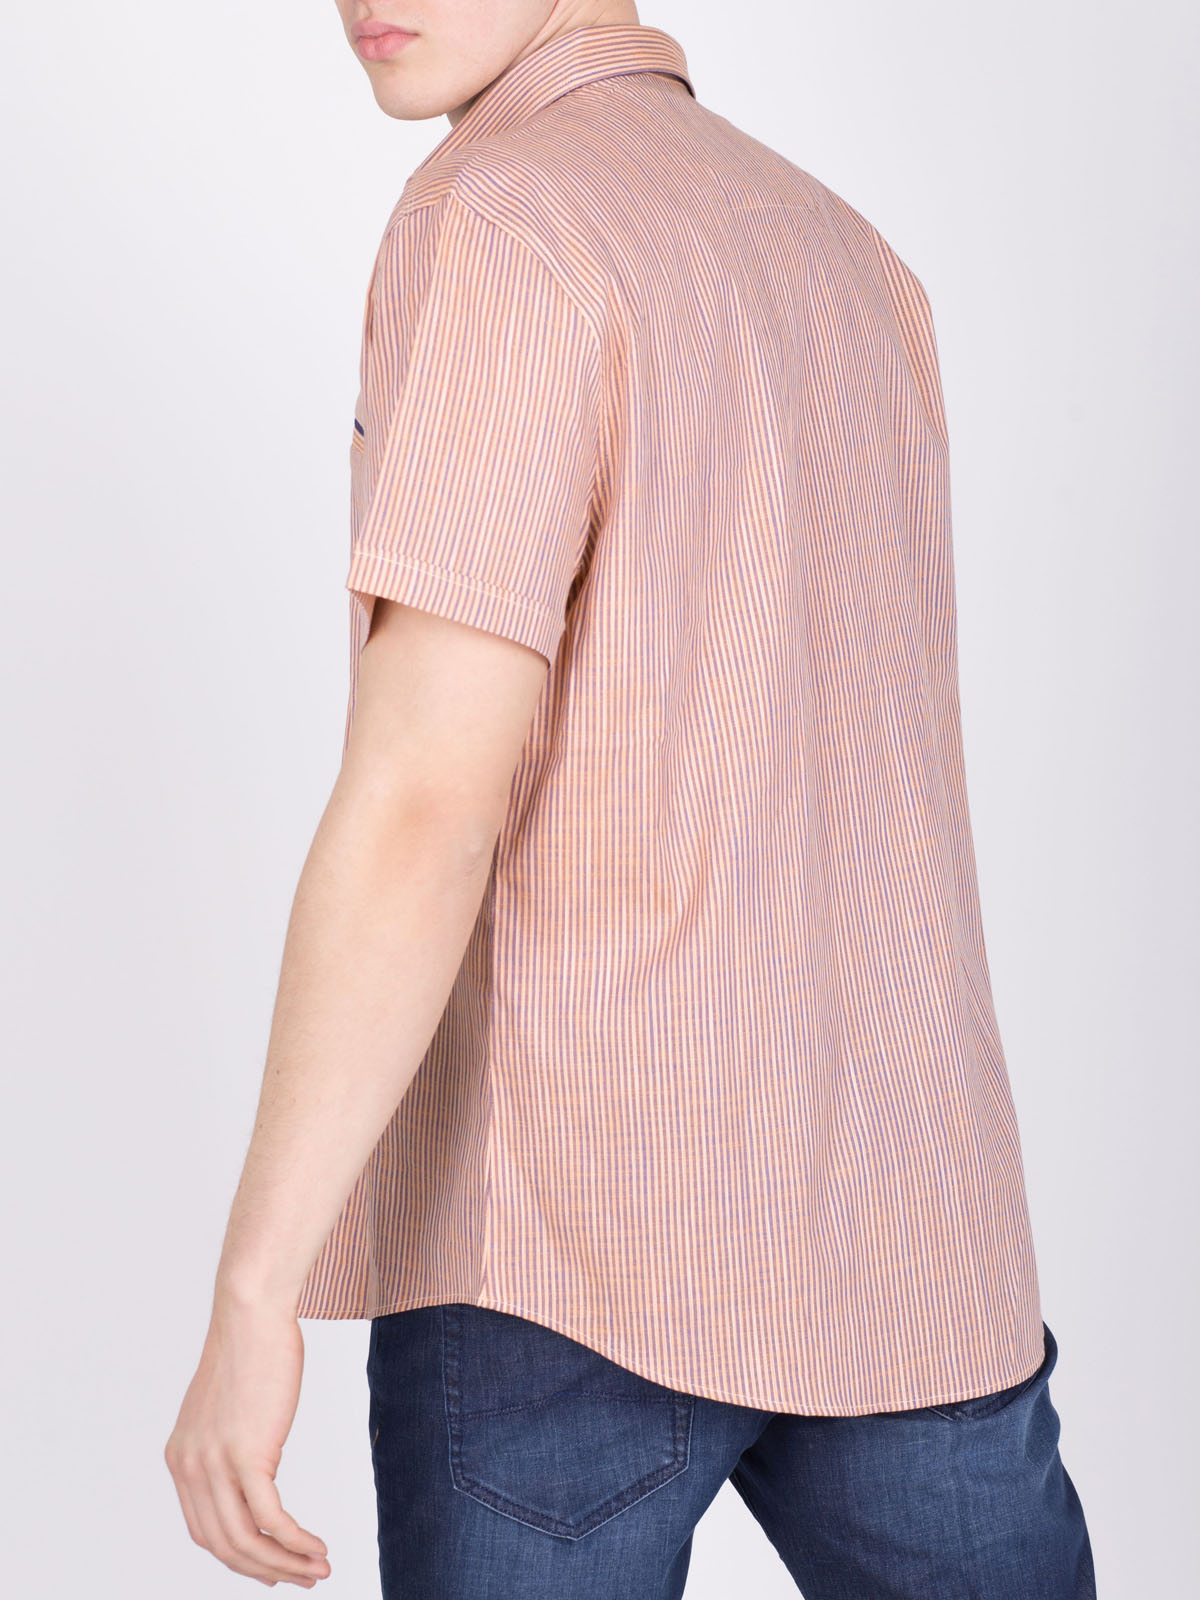 Shirt with linen in orange on blue stri - 80211 € 21.93 img3